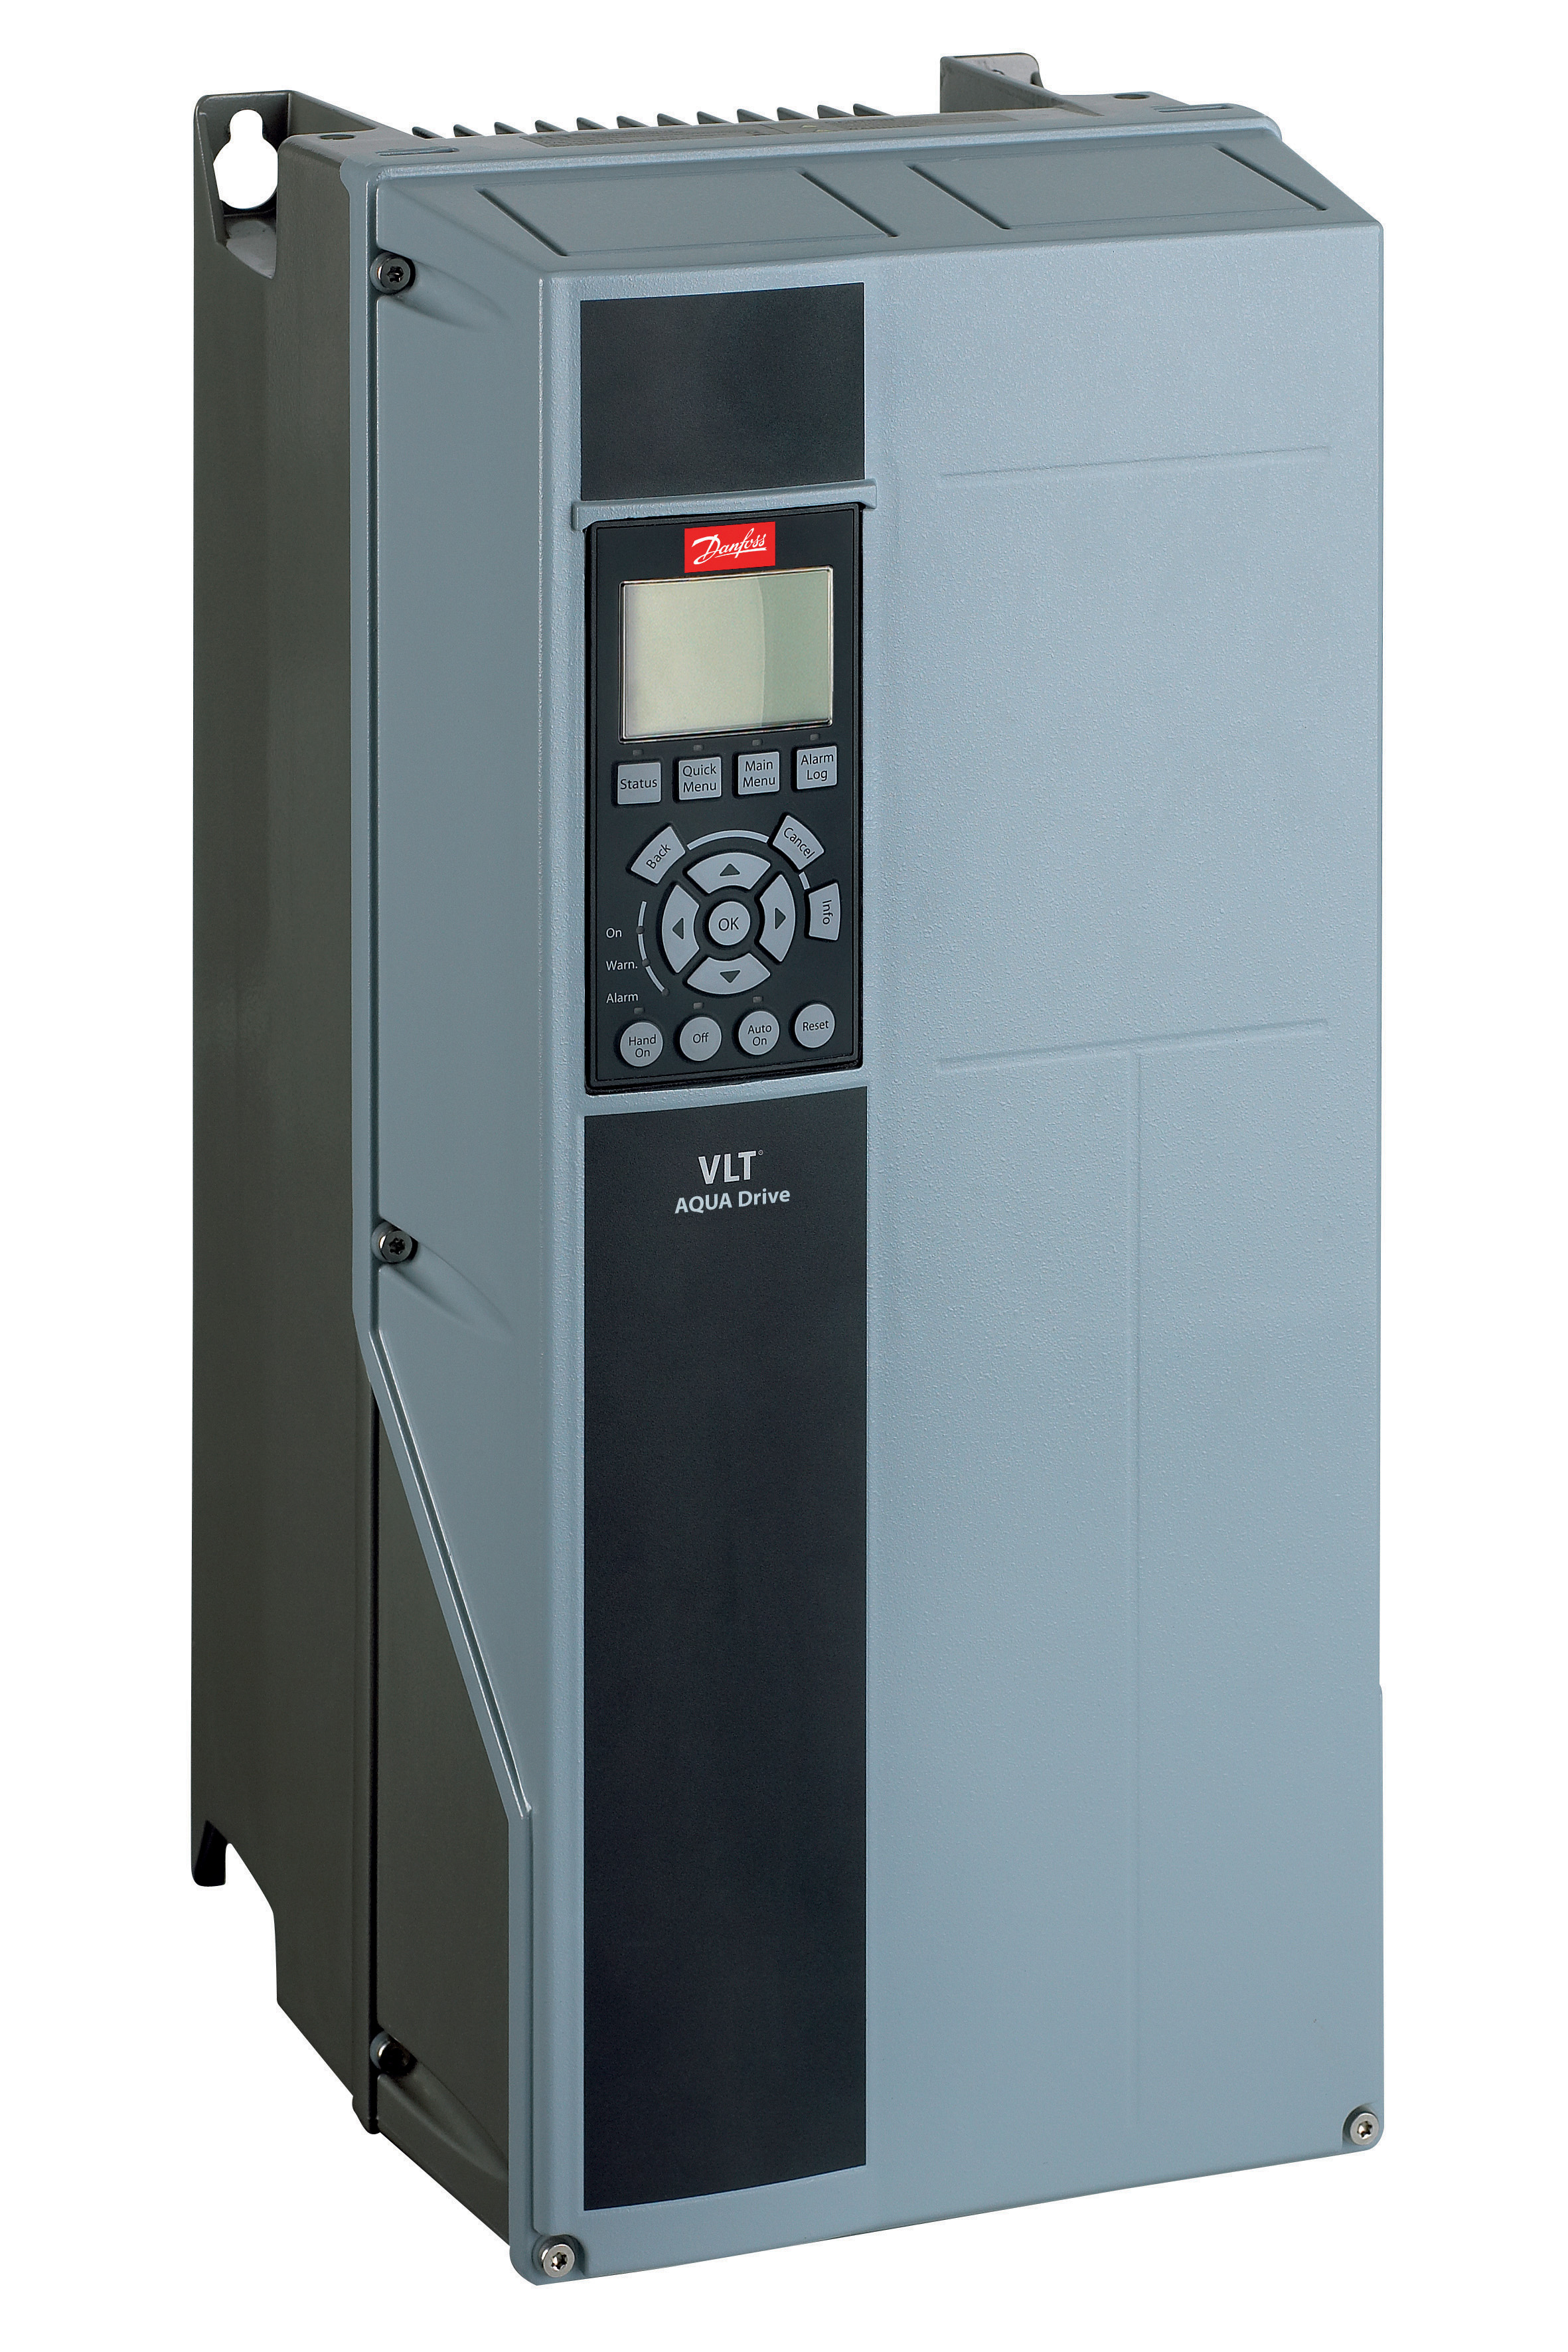 Figure 2. The VLT® AQUA Drive is designed to provide the highest level of performance of AC-motor-driven water and wastewater applications and is suited for both new and retrofit projects. Source: Danfoss Drives